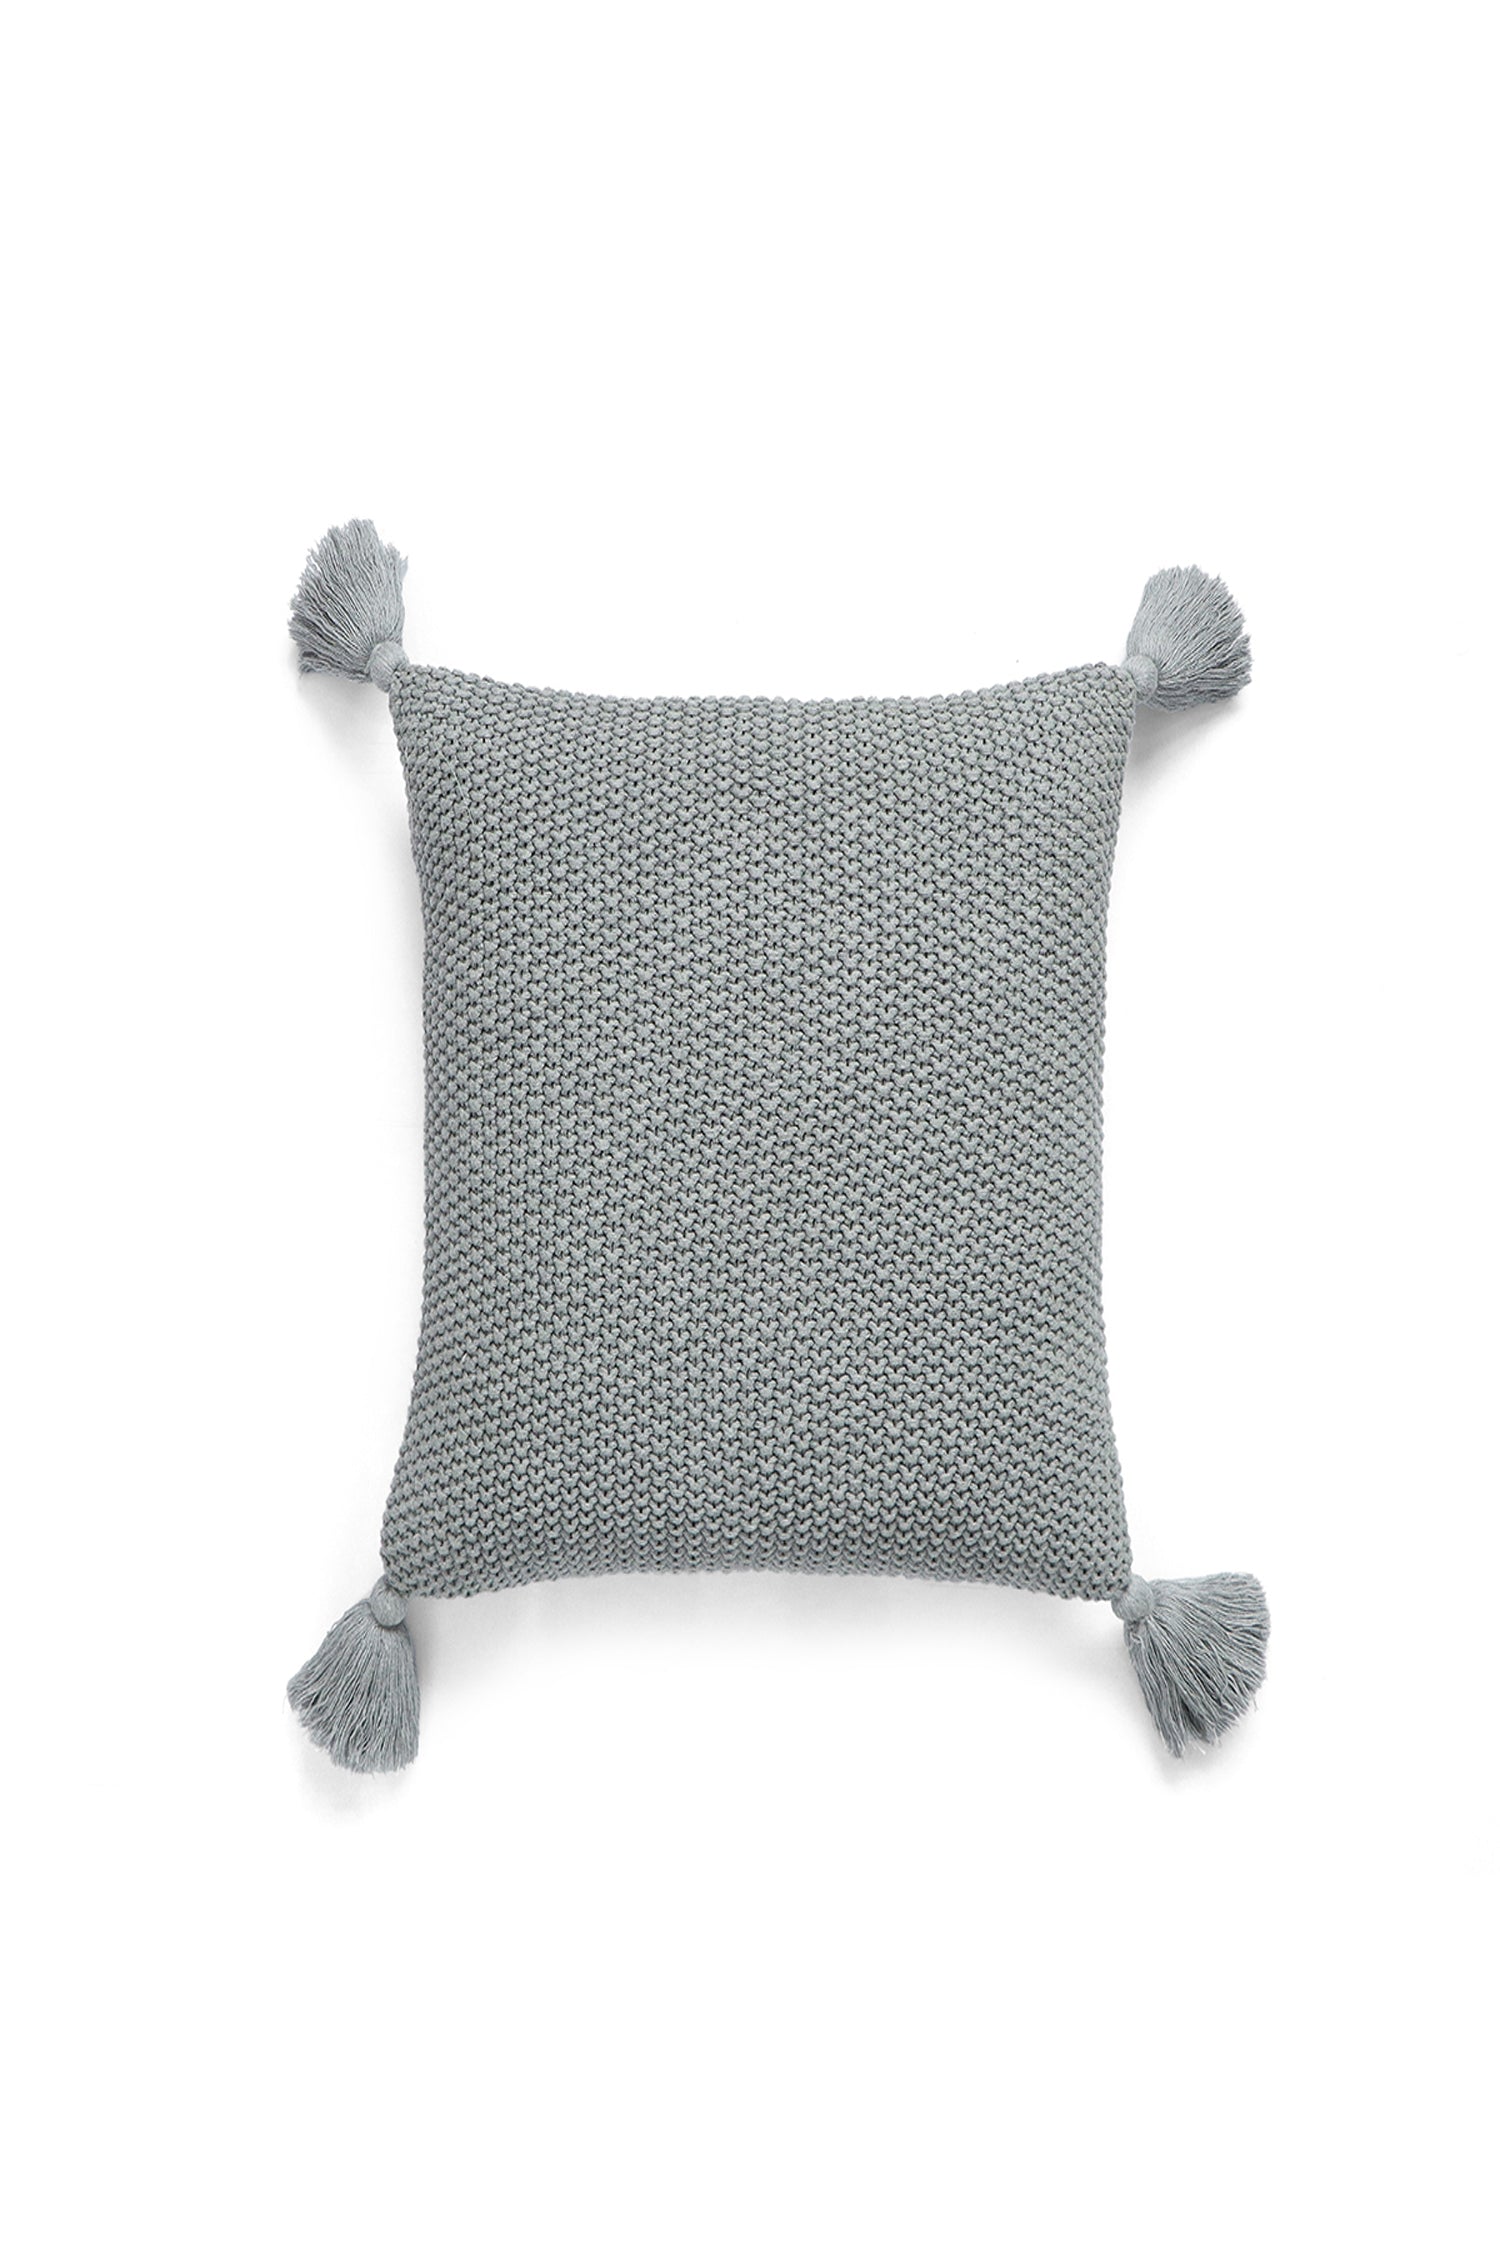 Moss Knitted Decorative Cushion cover (Light Grey Melange)